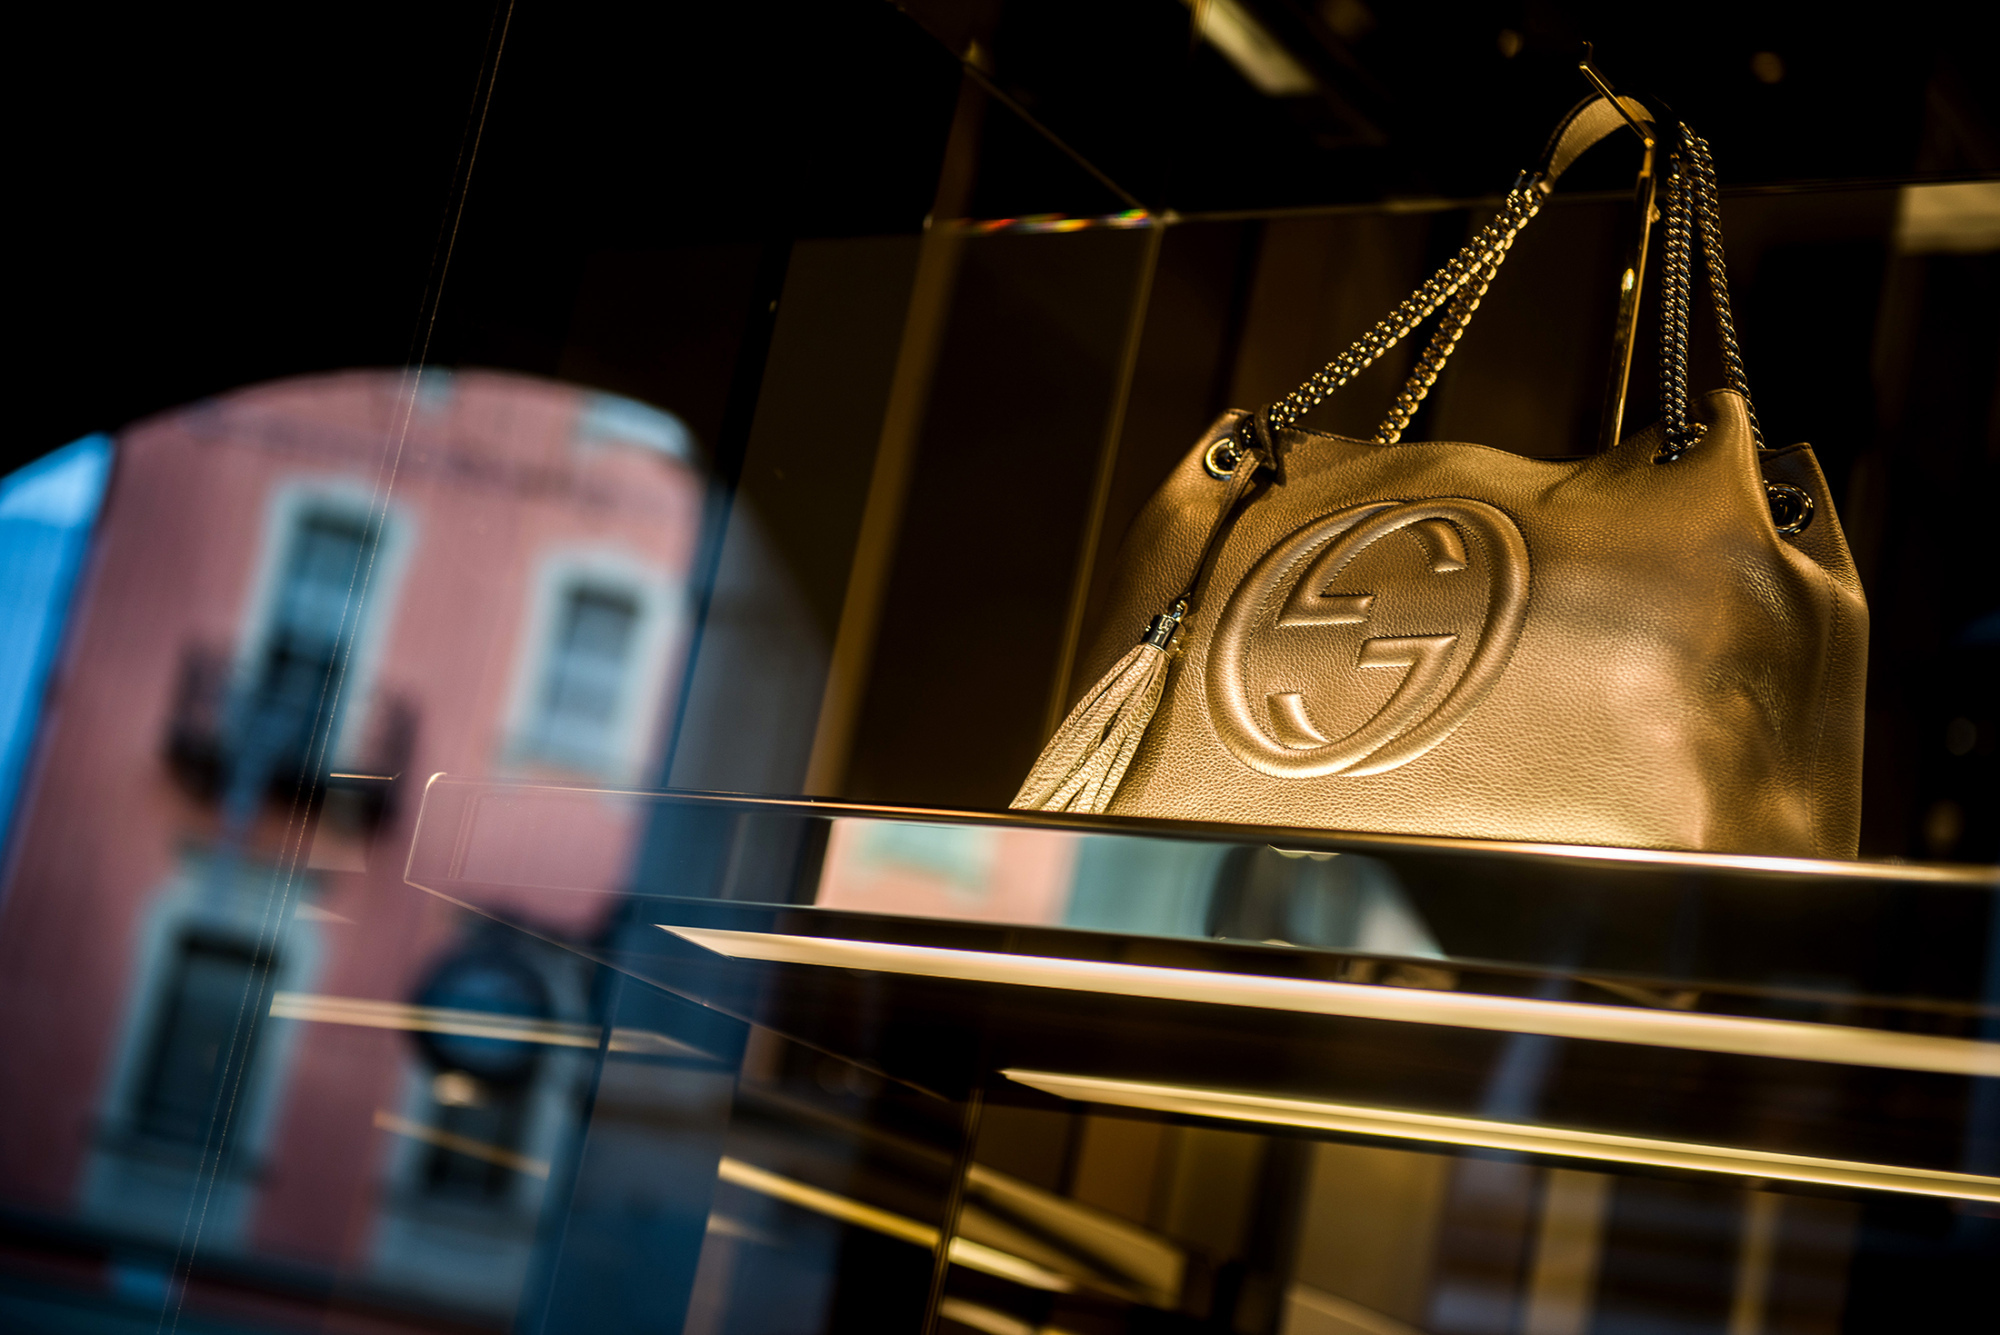 Gucci CEO sees 2021 sales in line with 2019, perhaps a little higher